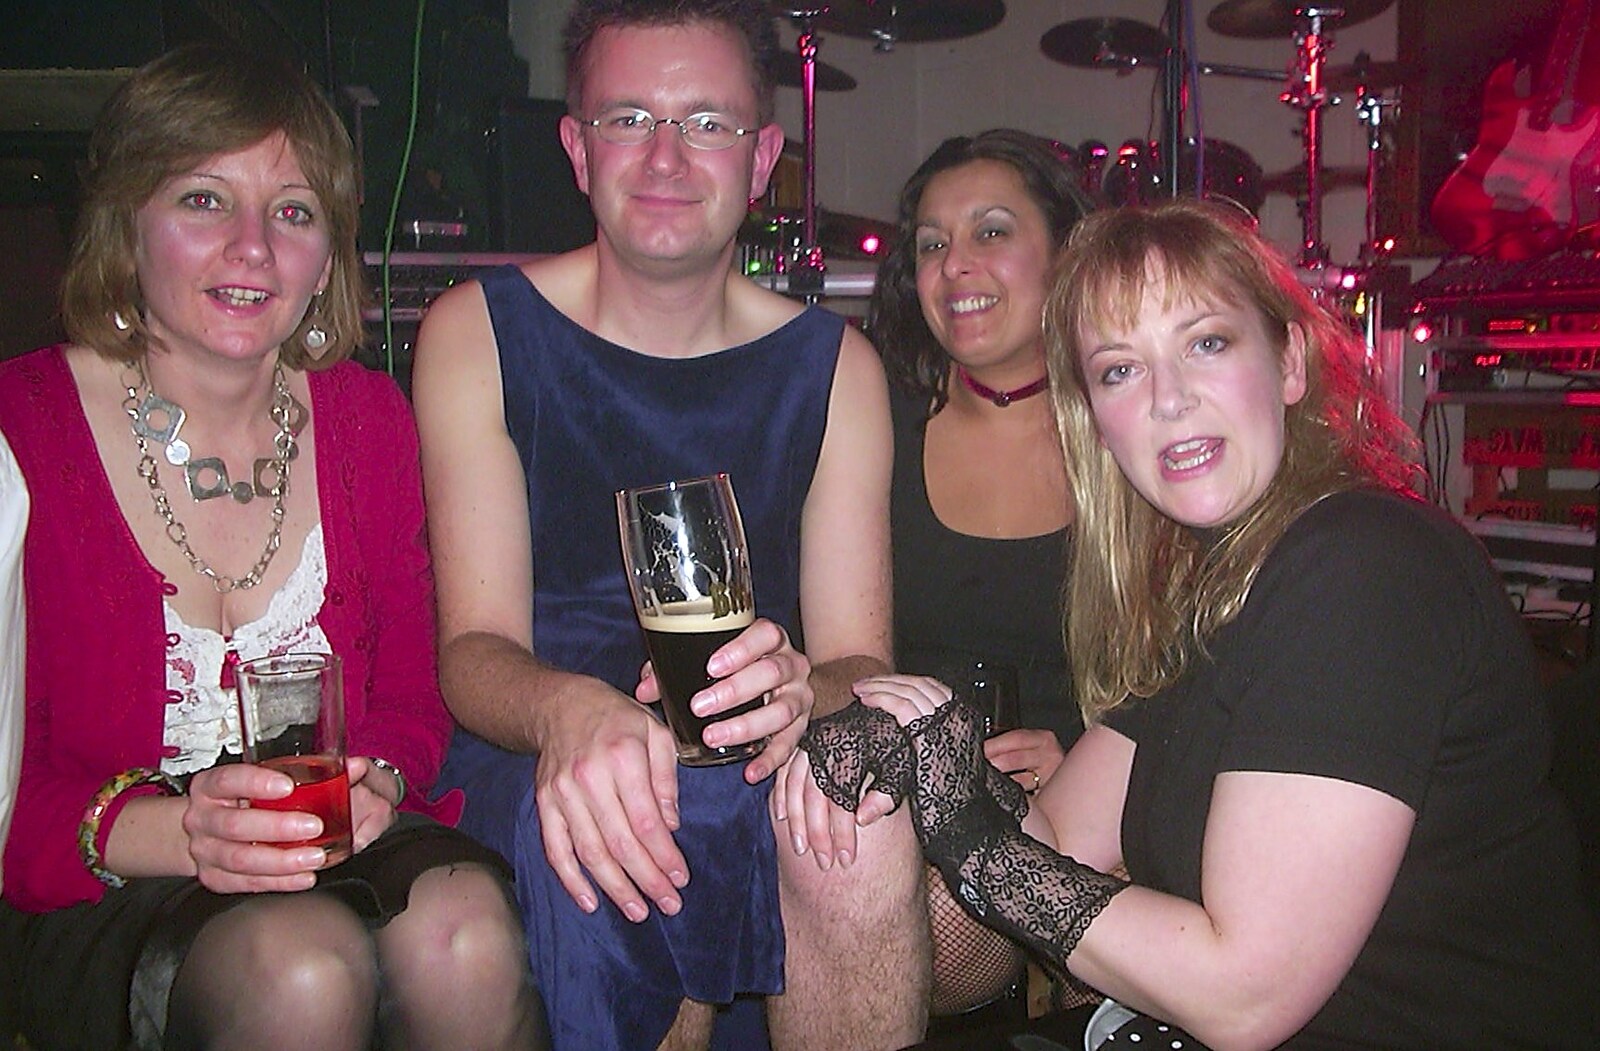 Nosher hangs out with the girls from The BBs do New Year's Eve at The Cider Shed, Banham, Norfolk - 31st December 2003